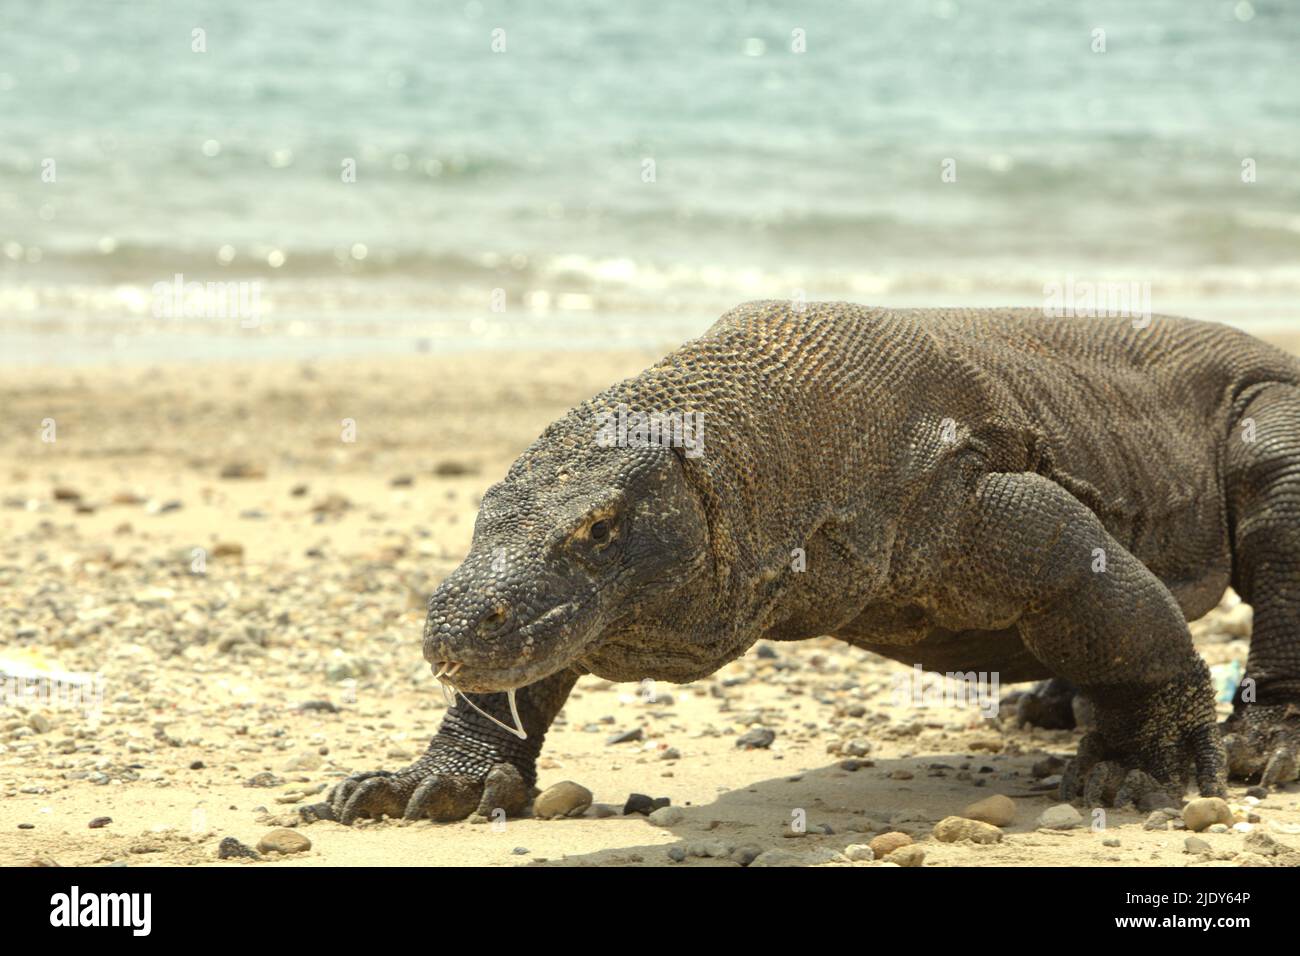 A komodo dragon (Varanus komodoensis) discharging its saliva as it is walking on a beach in Komodo Island, Komodo National Park, West Manggarai, East Nusa Tenggara, Indonesia. It has long believed that komodo dragon bites were fatal because of toxic bacteria in the lizard's mouth. However, a team of biologists led by Dr Brian G. Fry (University of Queensland), found that the mouths of the komodo dragons are 'ordinary'.  'The dragons do not have enough bacteria in their mouths to infect an injured animal,' Dr Fry said, as quoted by Sci News on June 27, 2013. Stock Photo